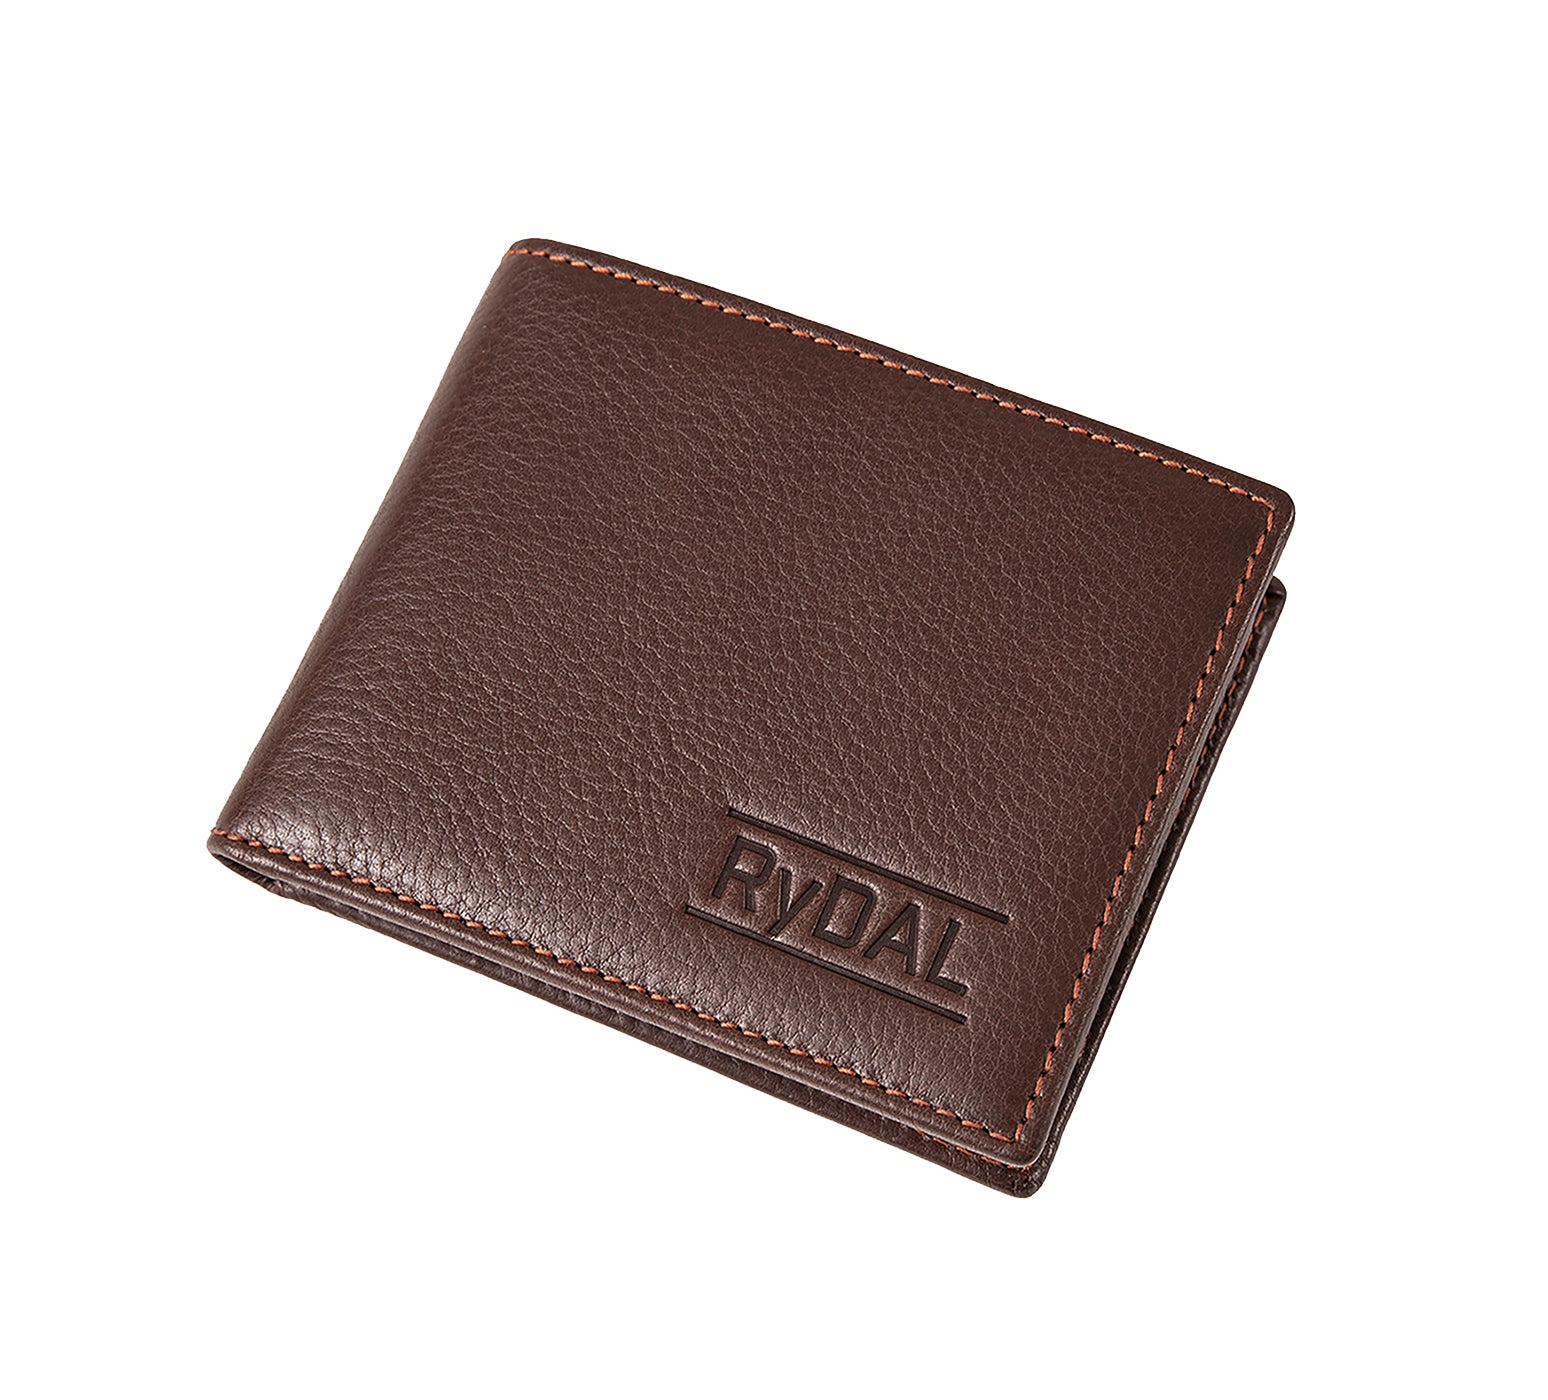 Mens Leather Wallet with Coin Pocket from Rydal in 'Dark Brown/Rust' showing wallet closed.